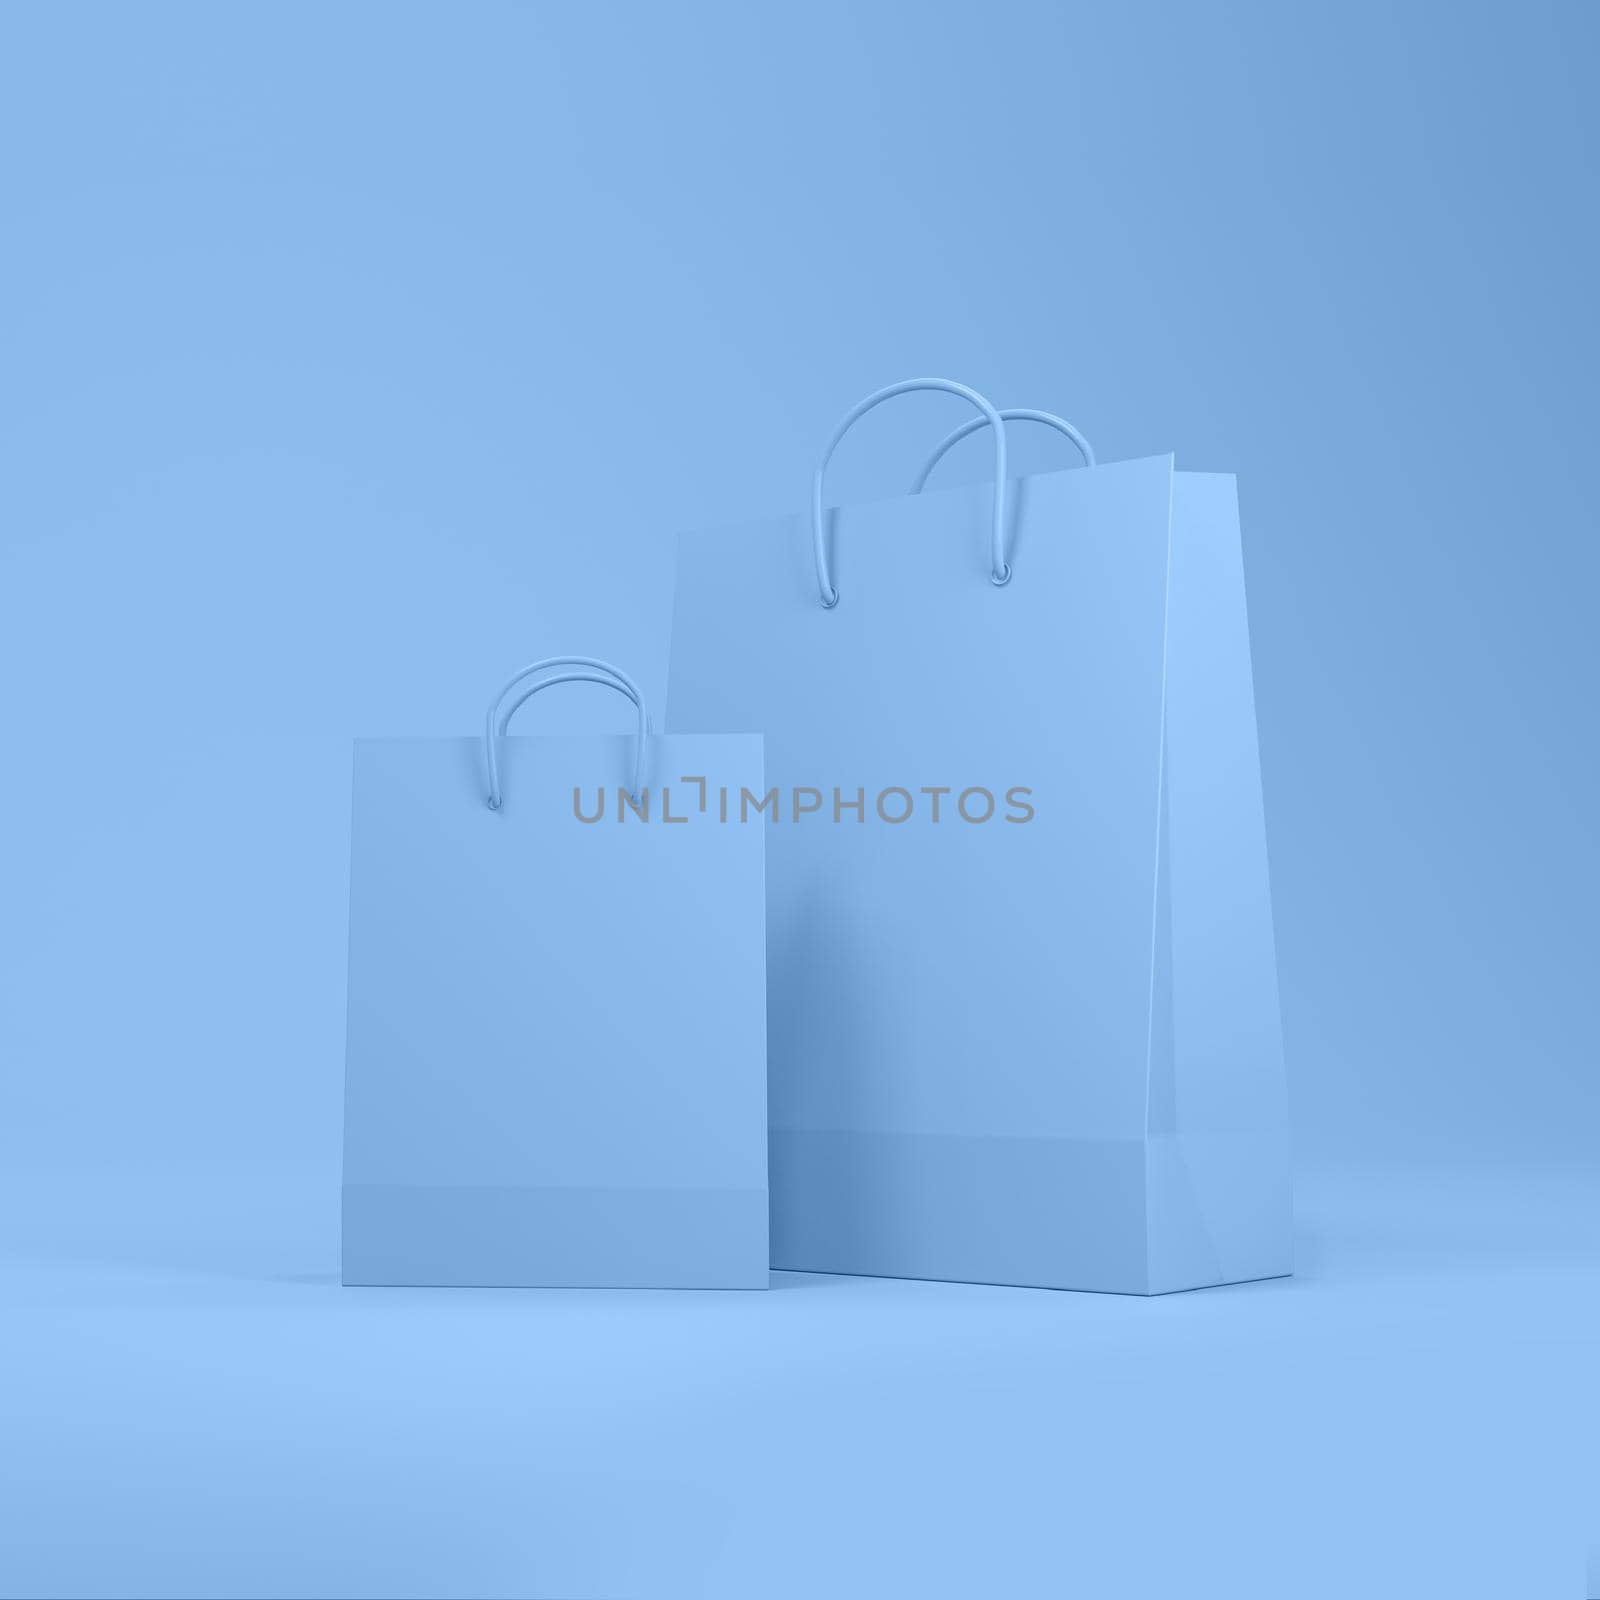 Shopping bags in blue background with space for text or design. 3d rendering.